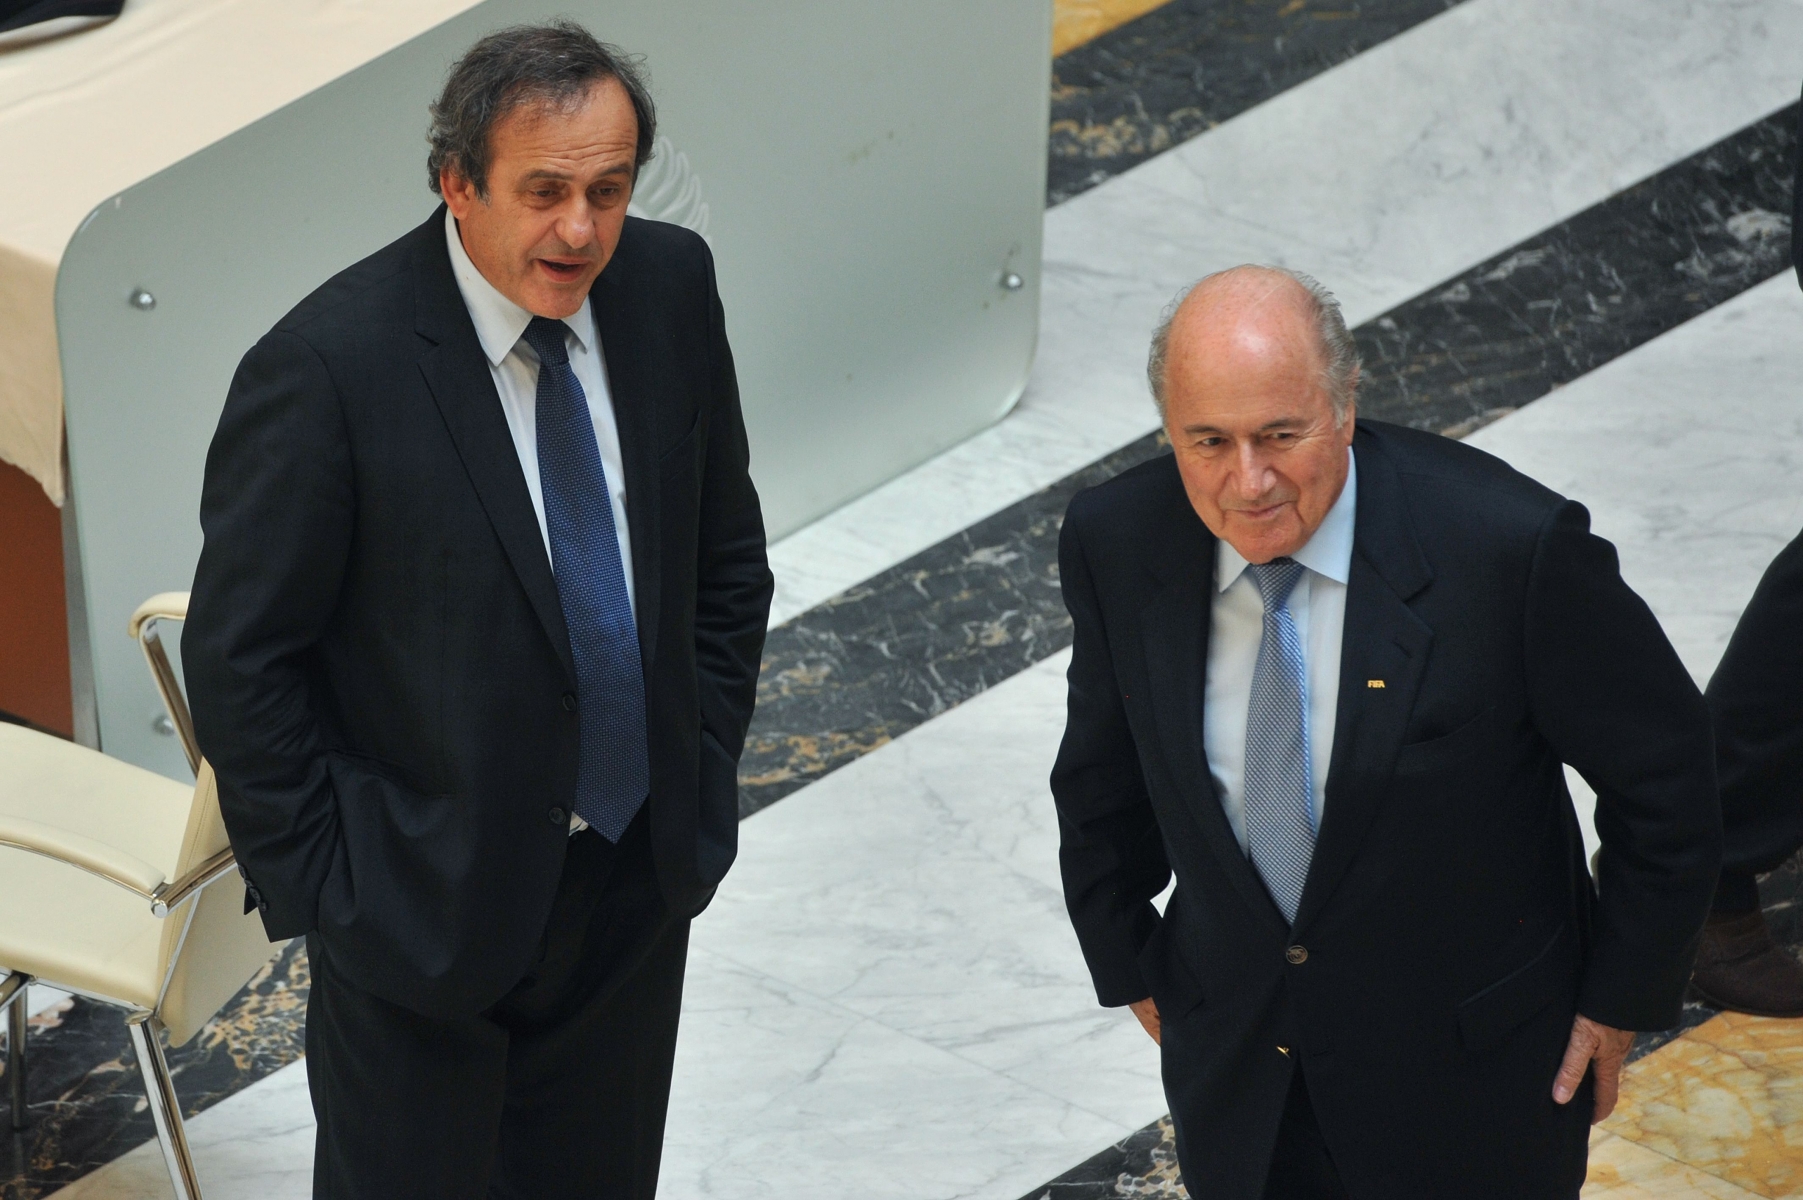 FILE - In this May 23, 2012 file photo UEFA President Michel Platini and FIFA President Joseph Blatter, from left, arrive at the meeting of the Confederation of North, Central American and Caribbean Association Football (CONCACAF), prior to the two-day congress of FIFA in Budapest, Hungary.  On Thursday, Oct. 8, 2015 FIFA provisionally banned President Sepp Blatter and UEFA President Michel Platini for 90 days. (MTI, Szilard Koszticsak/MTI via AP, file) Soccer FIFA Platini